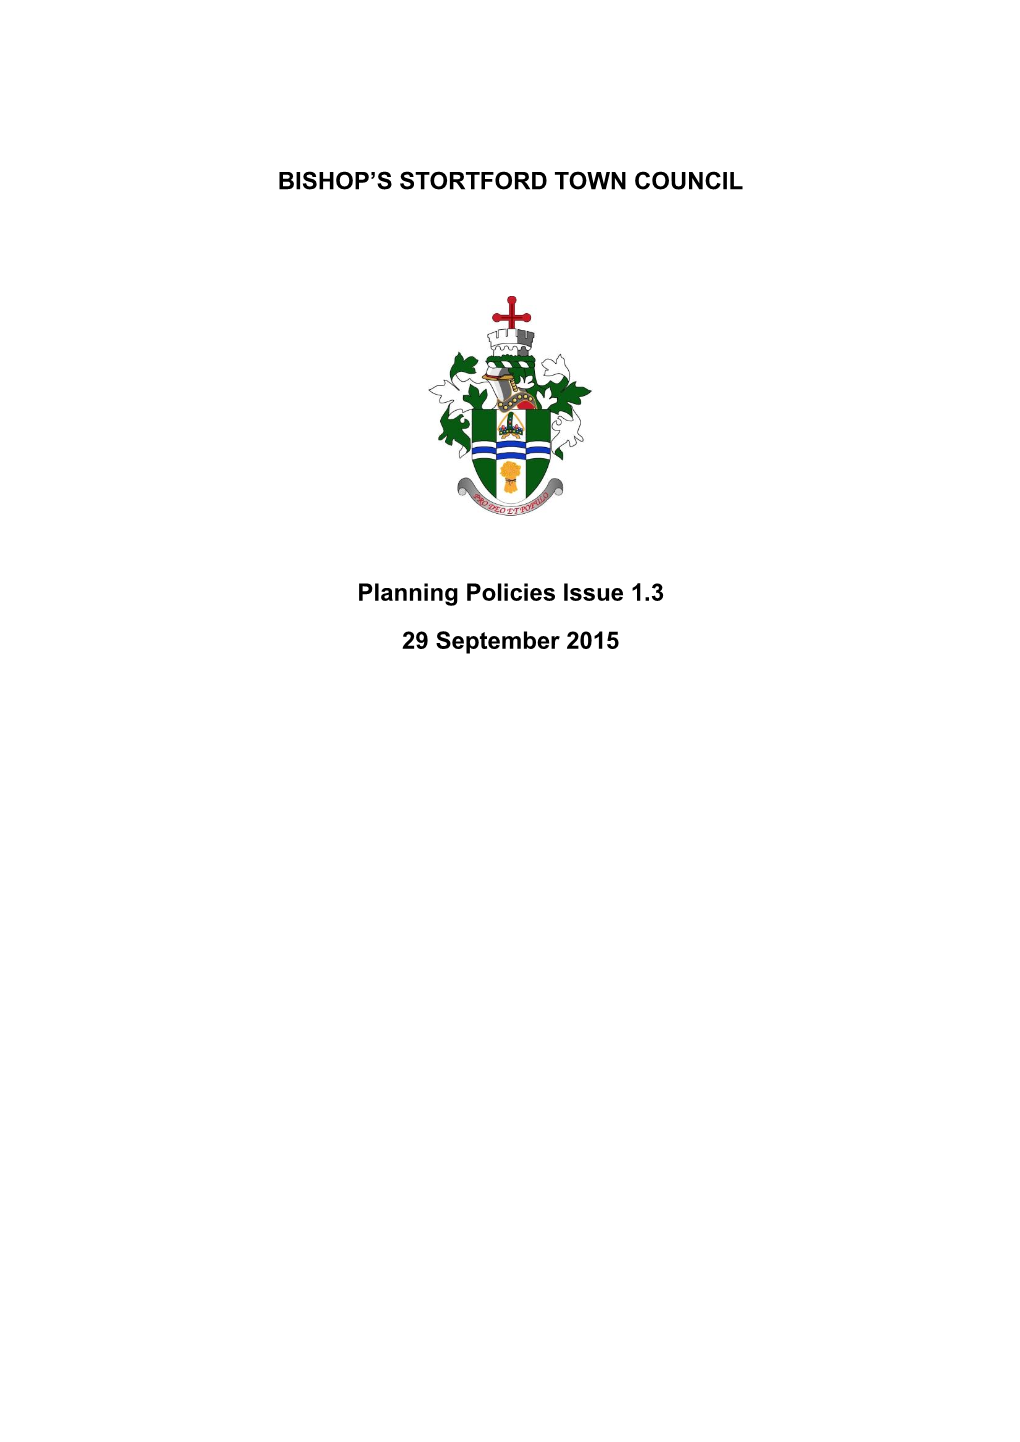 BISHOP's STORTFORD TOWN COUNCIL Planning Policies Issue